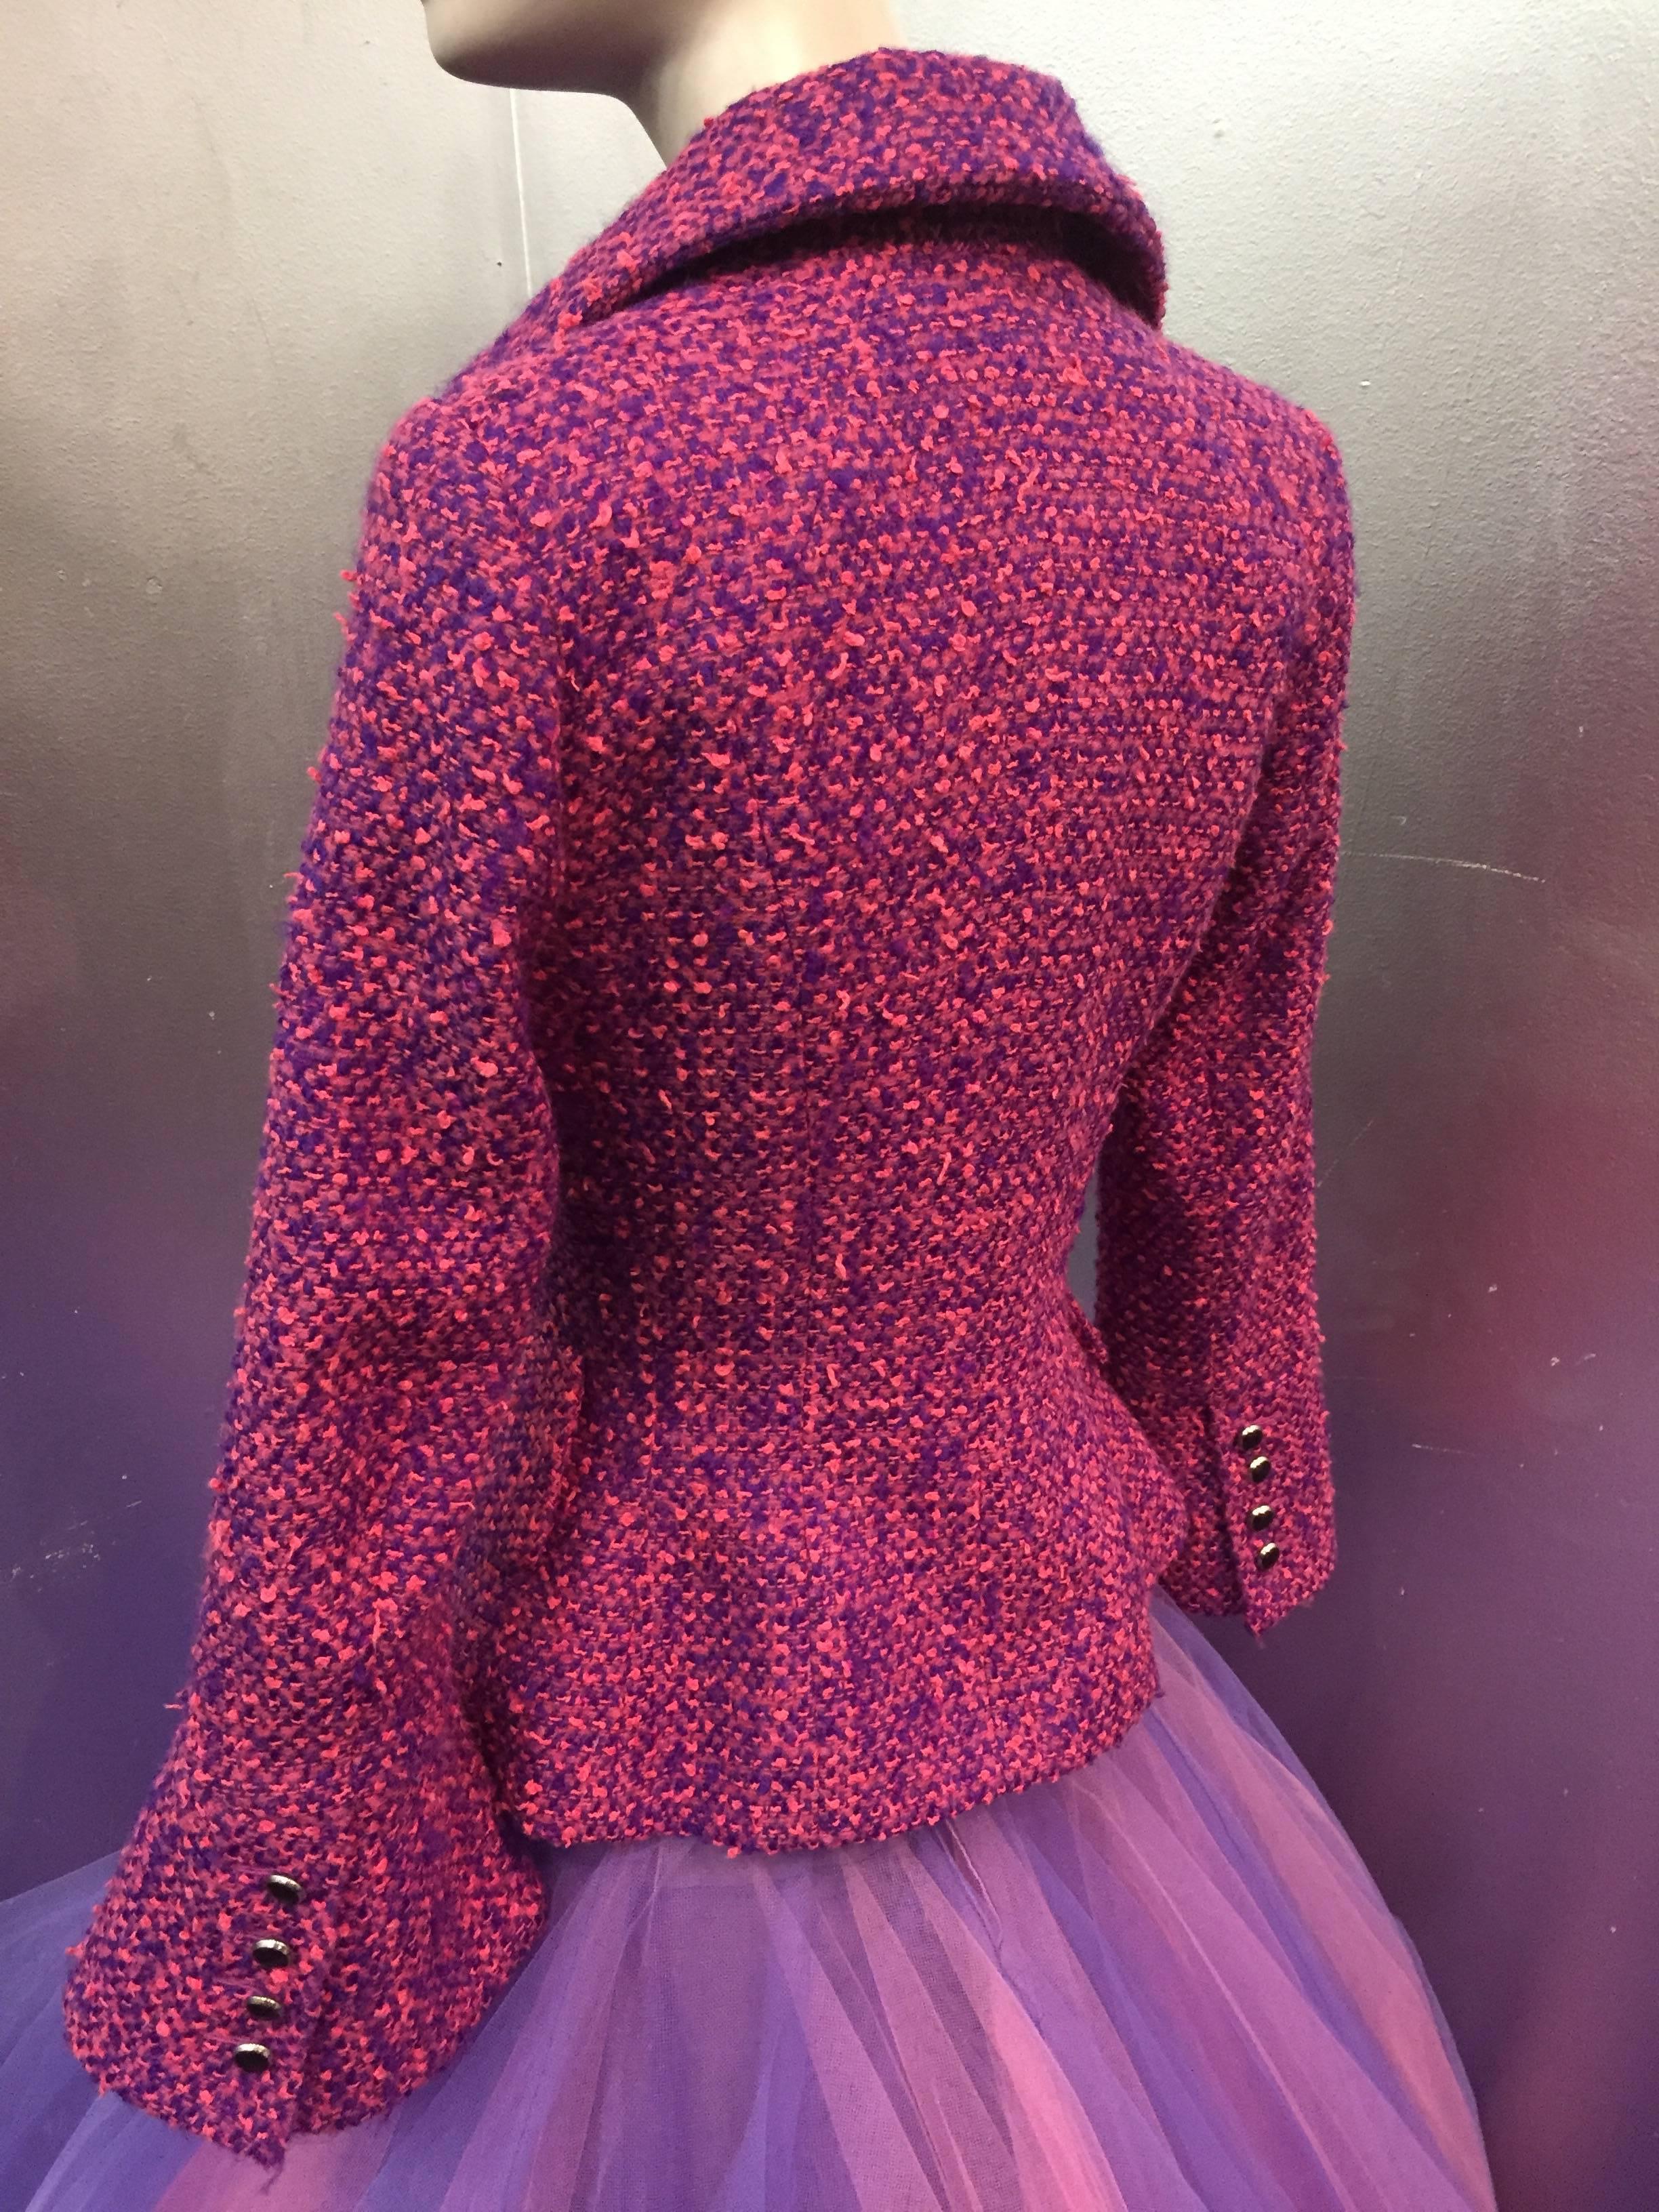 1990 JACQUES FATH Wool Tweed Jacket and Tulle Ball Skirt in Pink and Purple  3